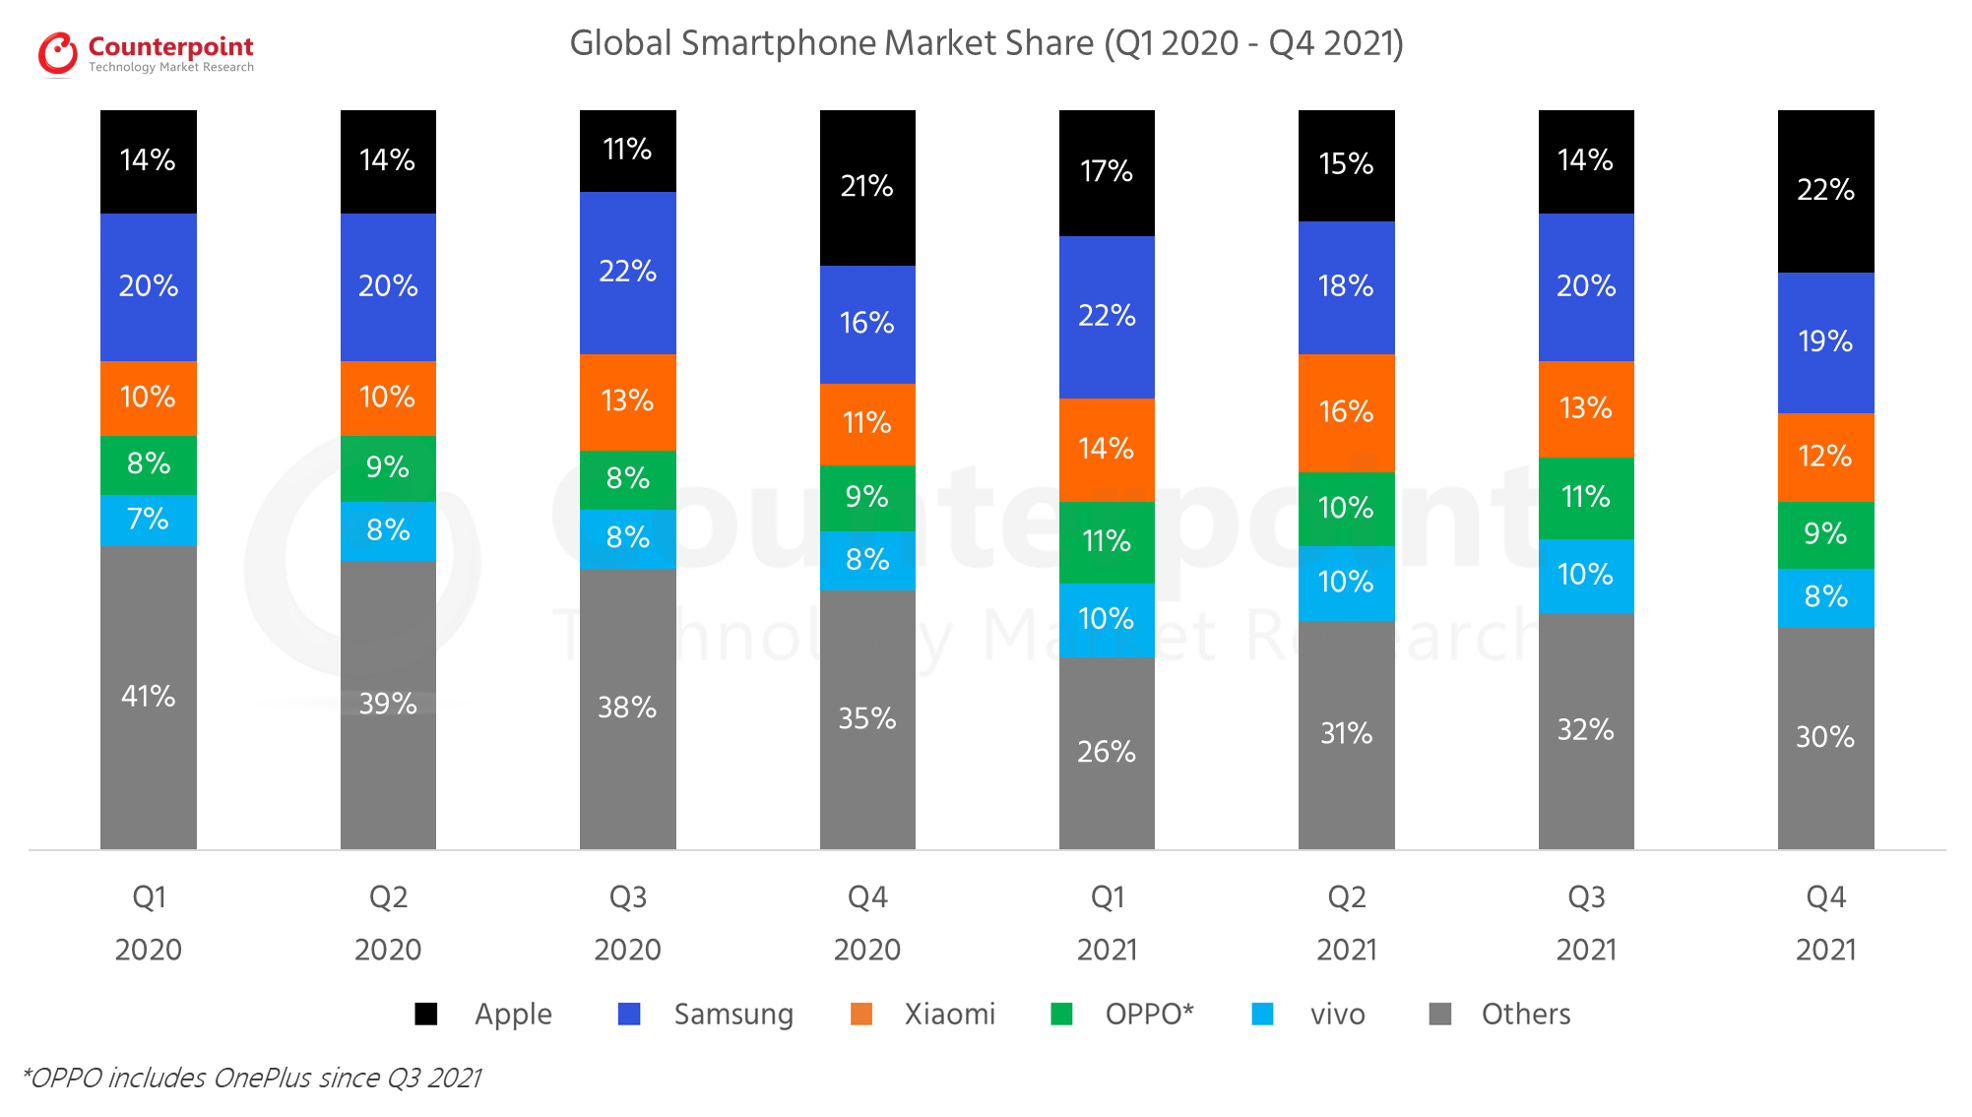 Global Smartphone Market Share Q2 2021 to Q1 2023